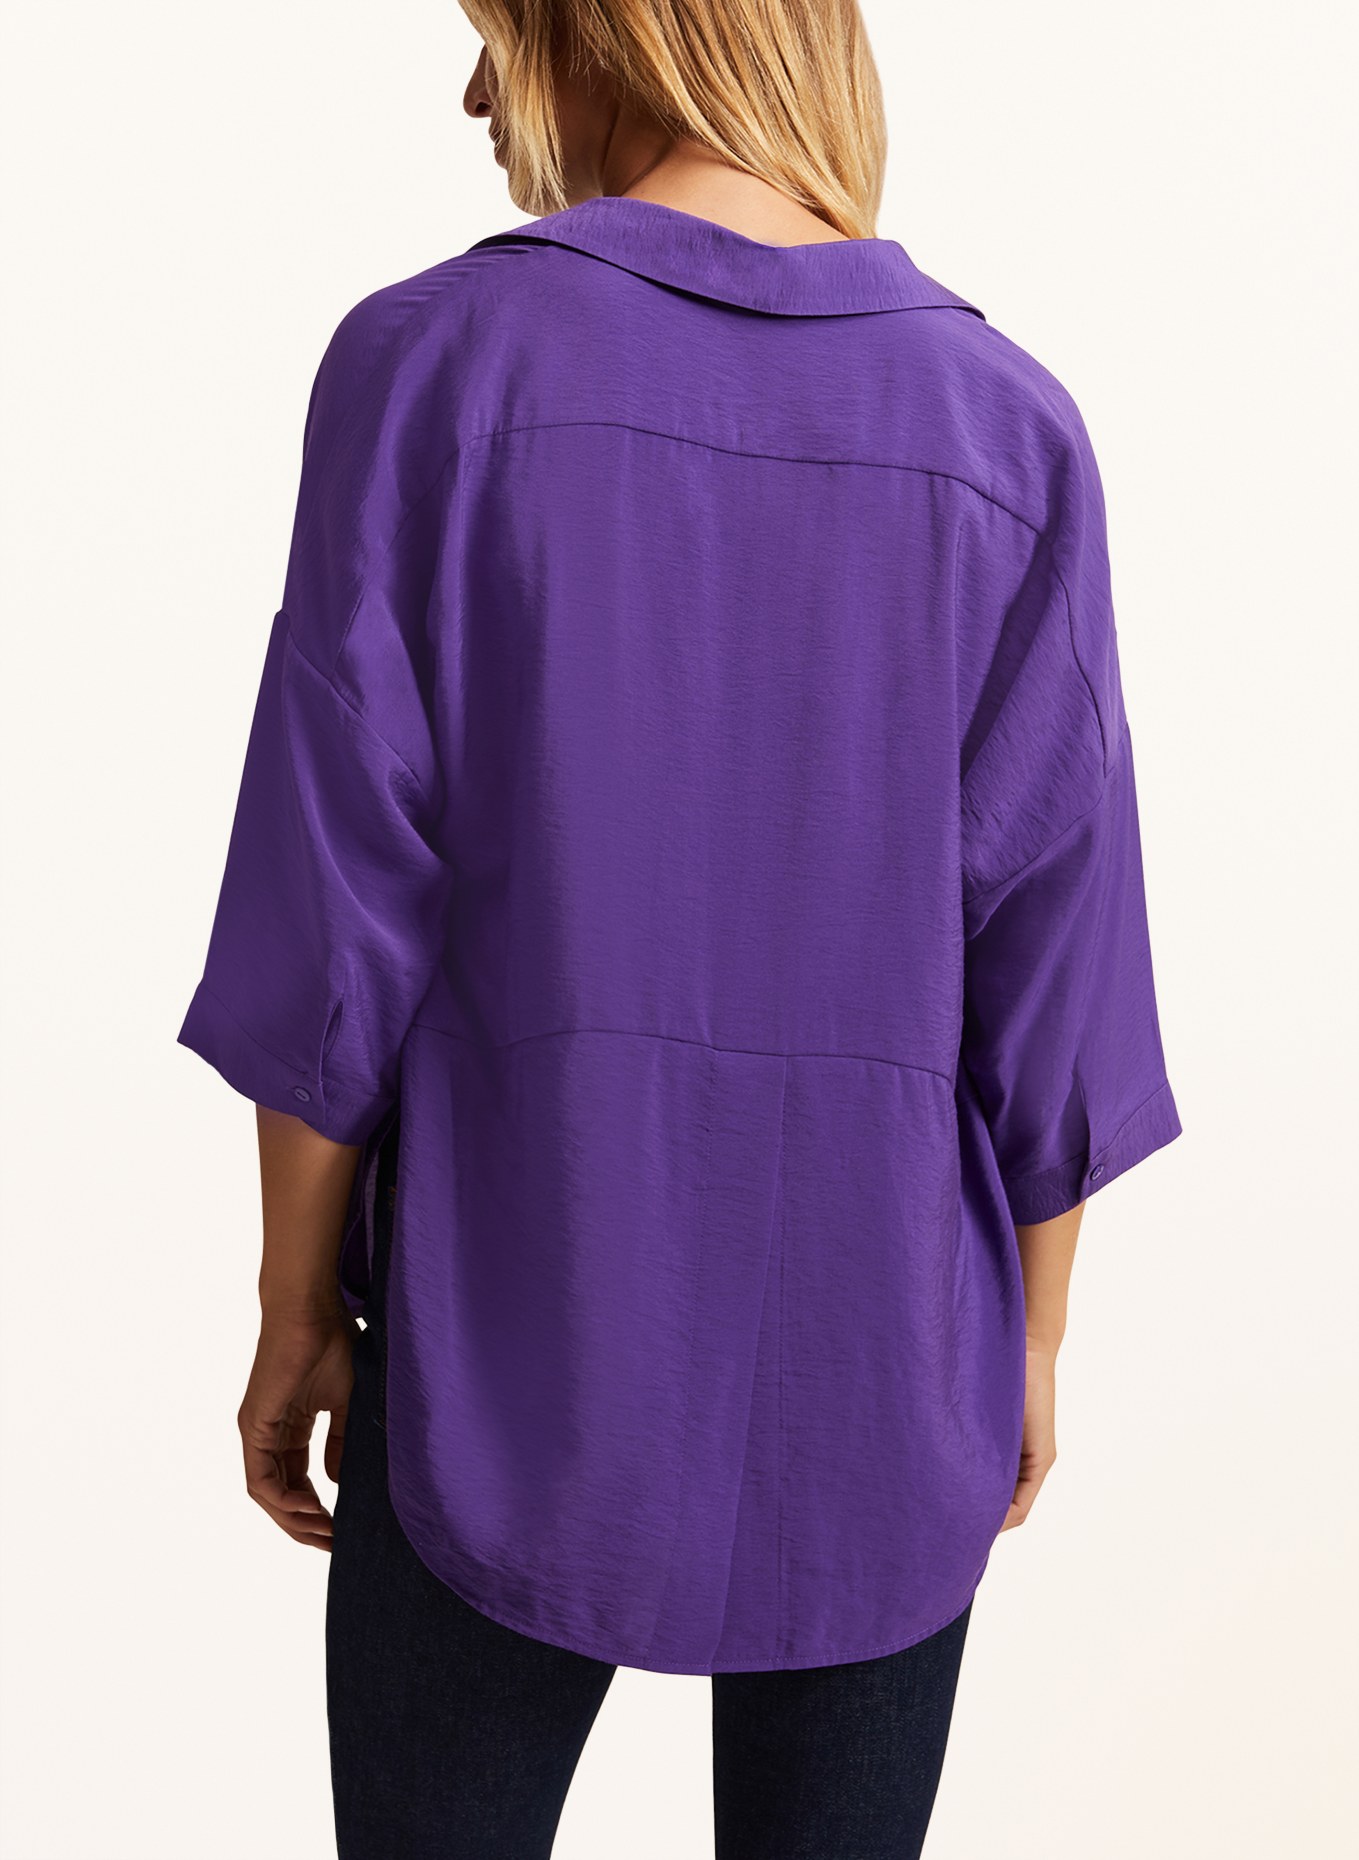 Phase Eight Shirt blouse CYNTHIA with 3/4 sleeves, Color: PURPLE (Image 3)